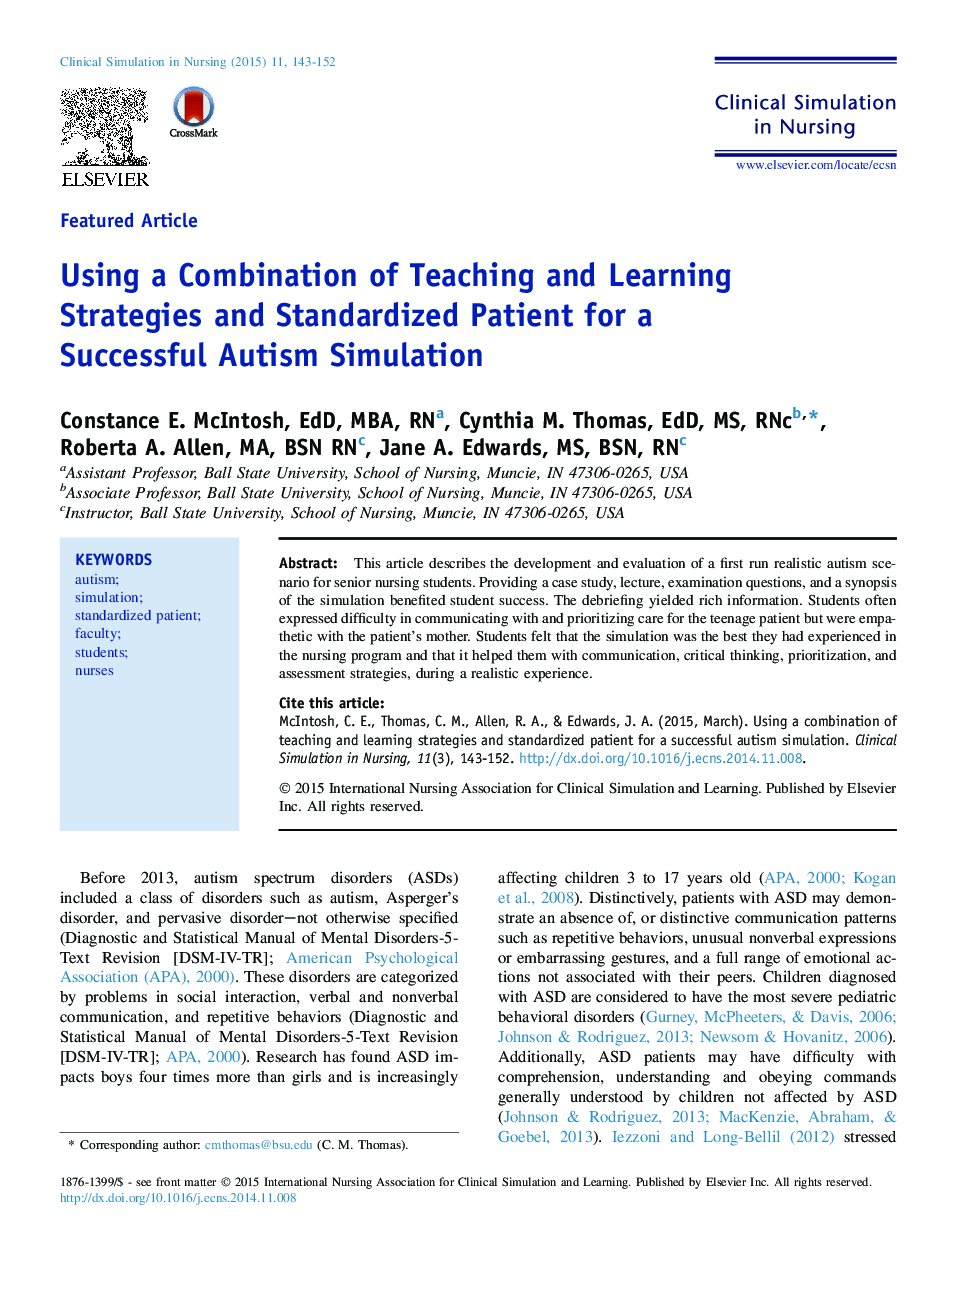 Using a Combination of Teaching and Learning Strategies and Standardized Patient for a Successful Autism Simulation